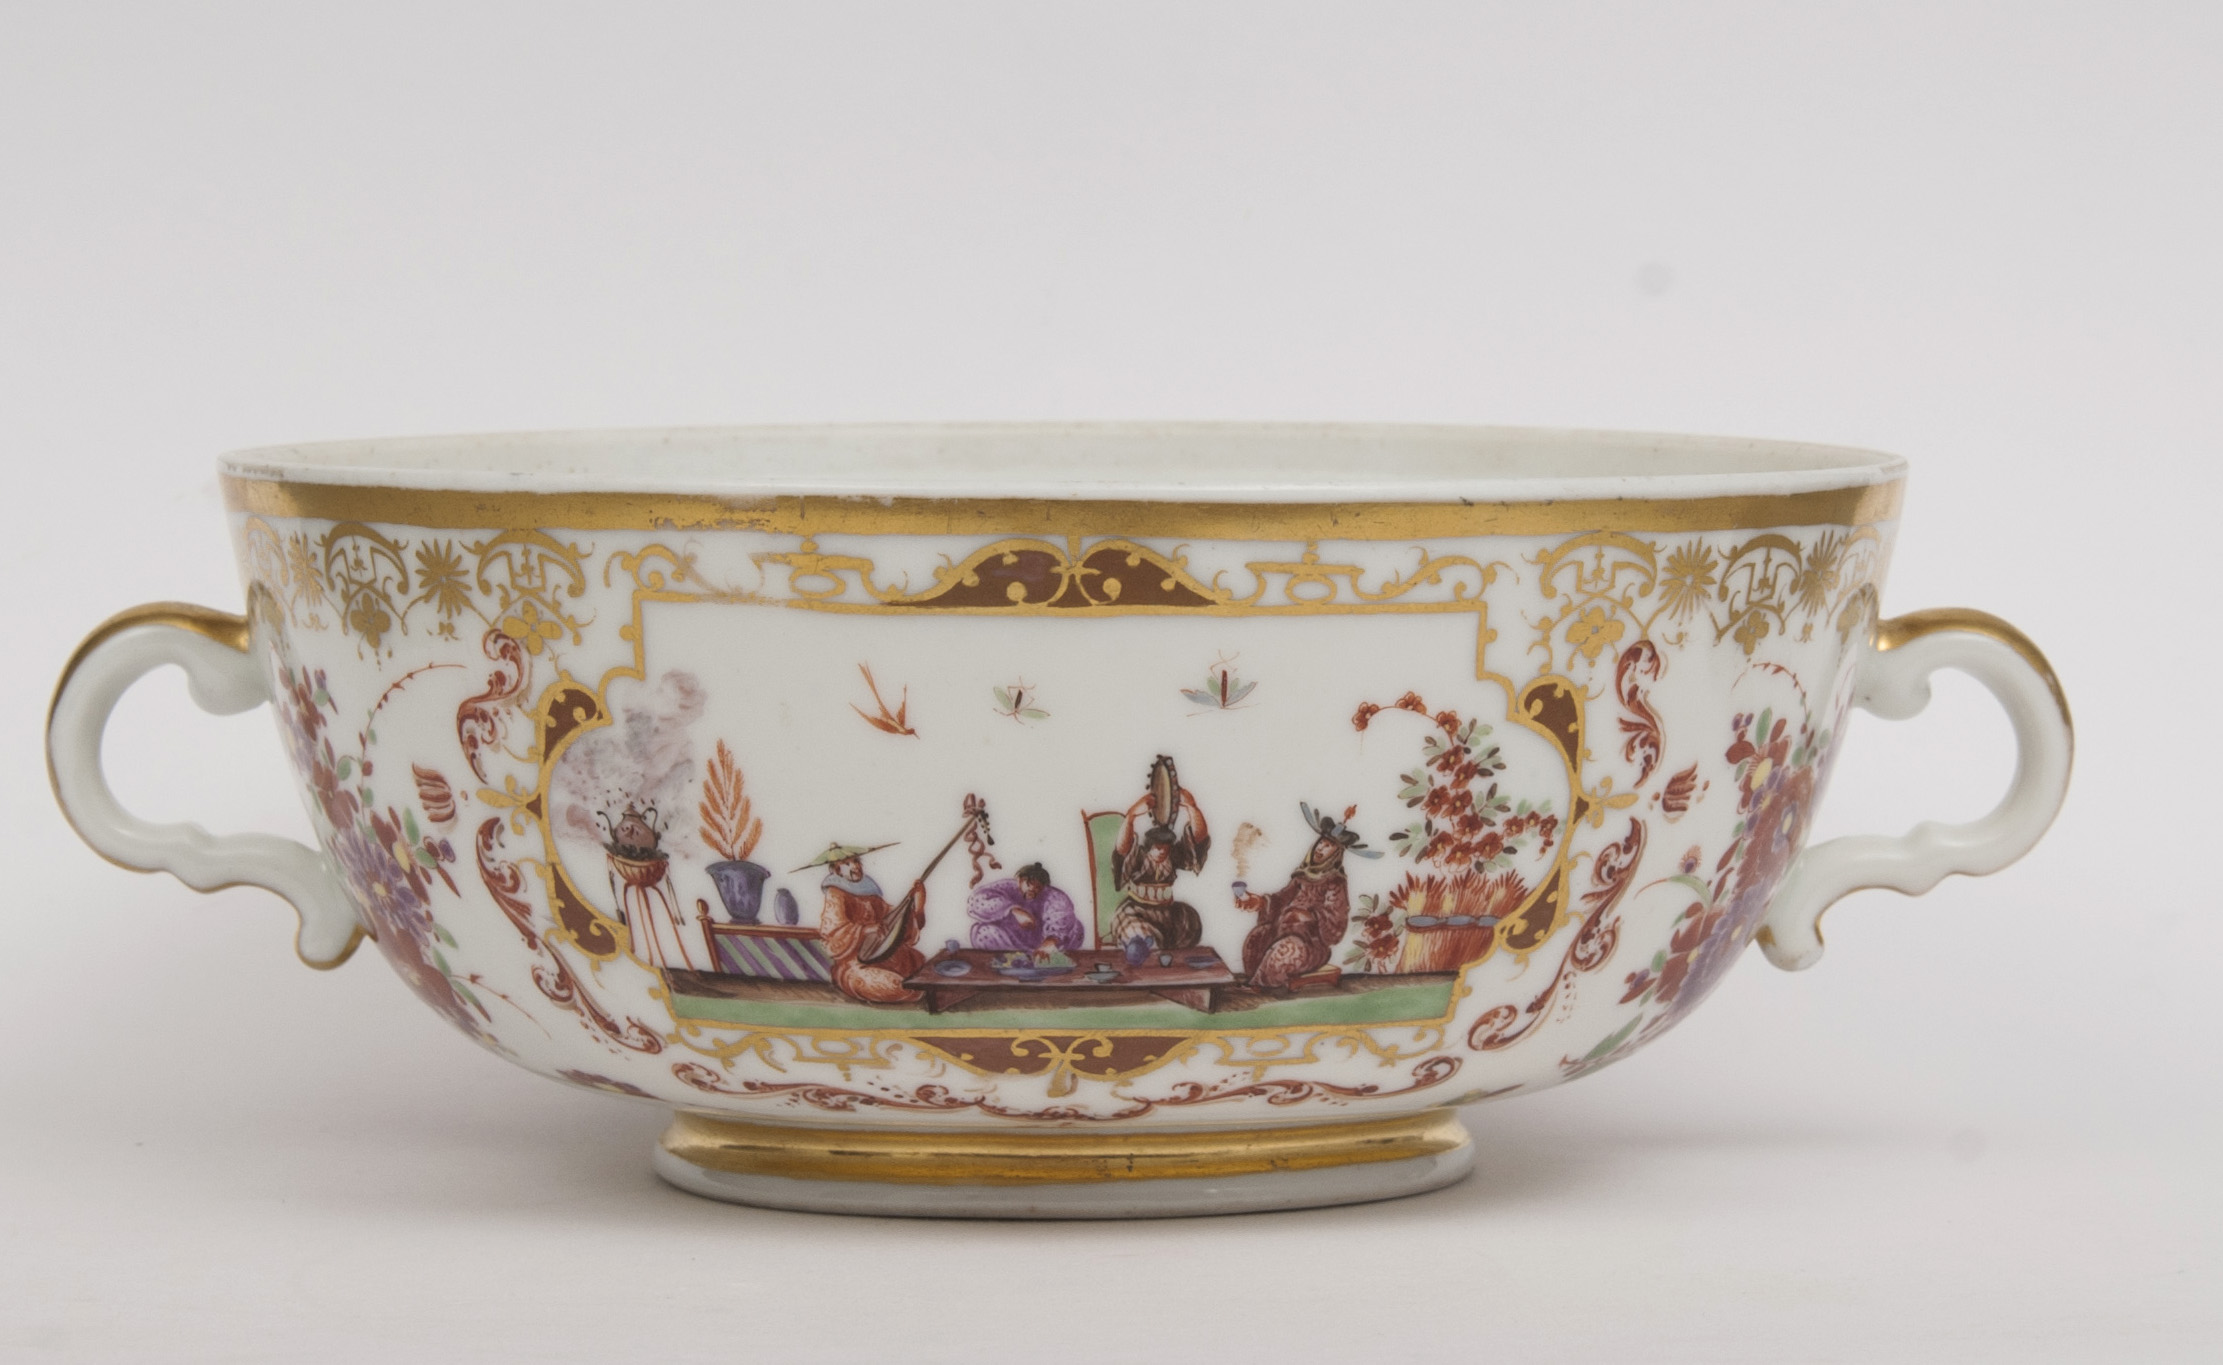 A rare two-handled bowl with Chinoiserie scenes after Johann Gregorius Höroldt - image 2